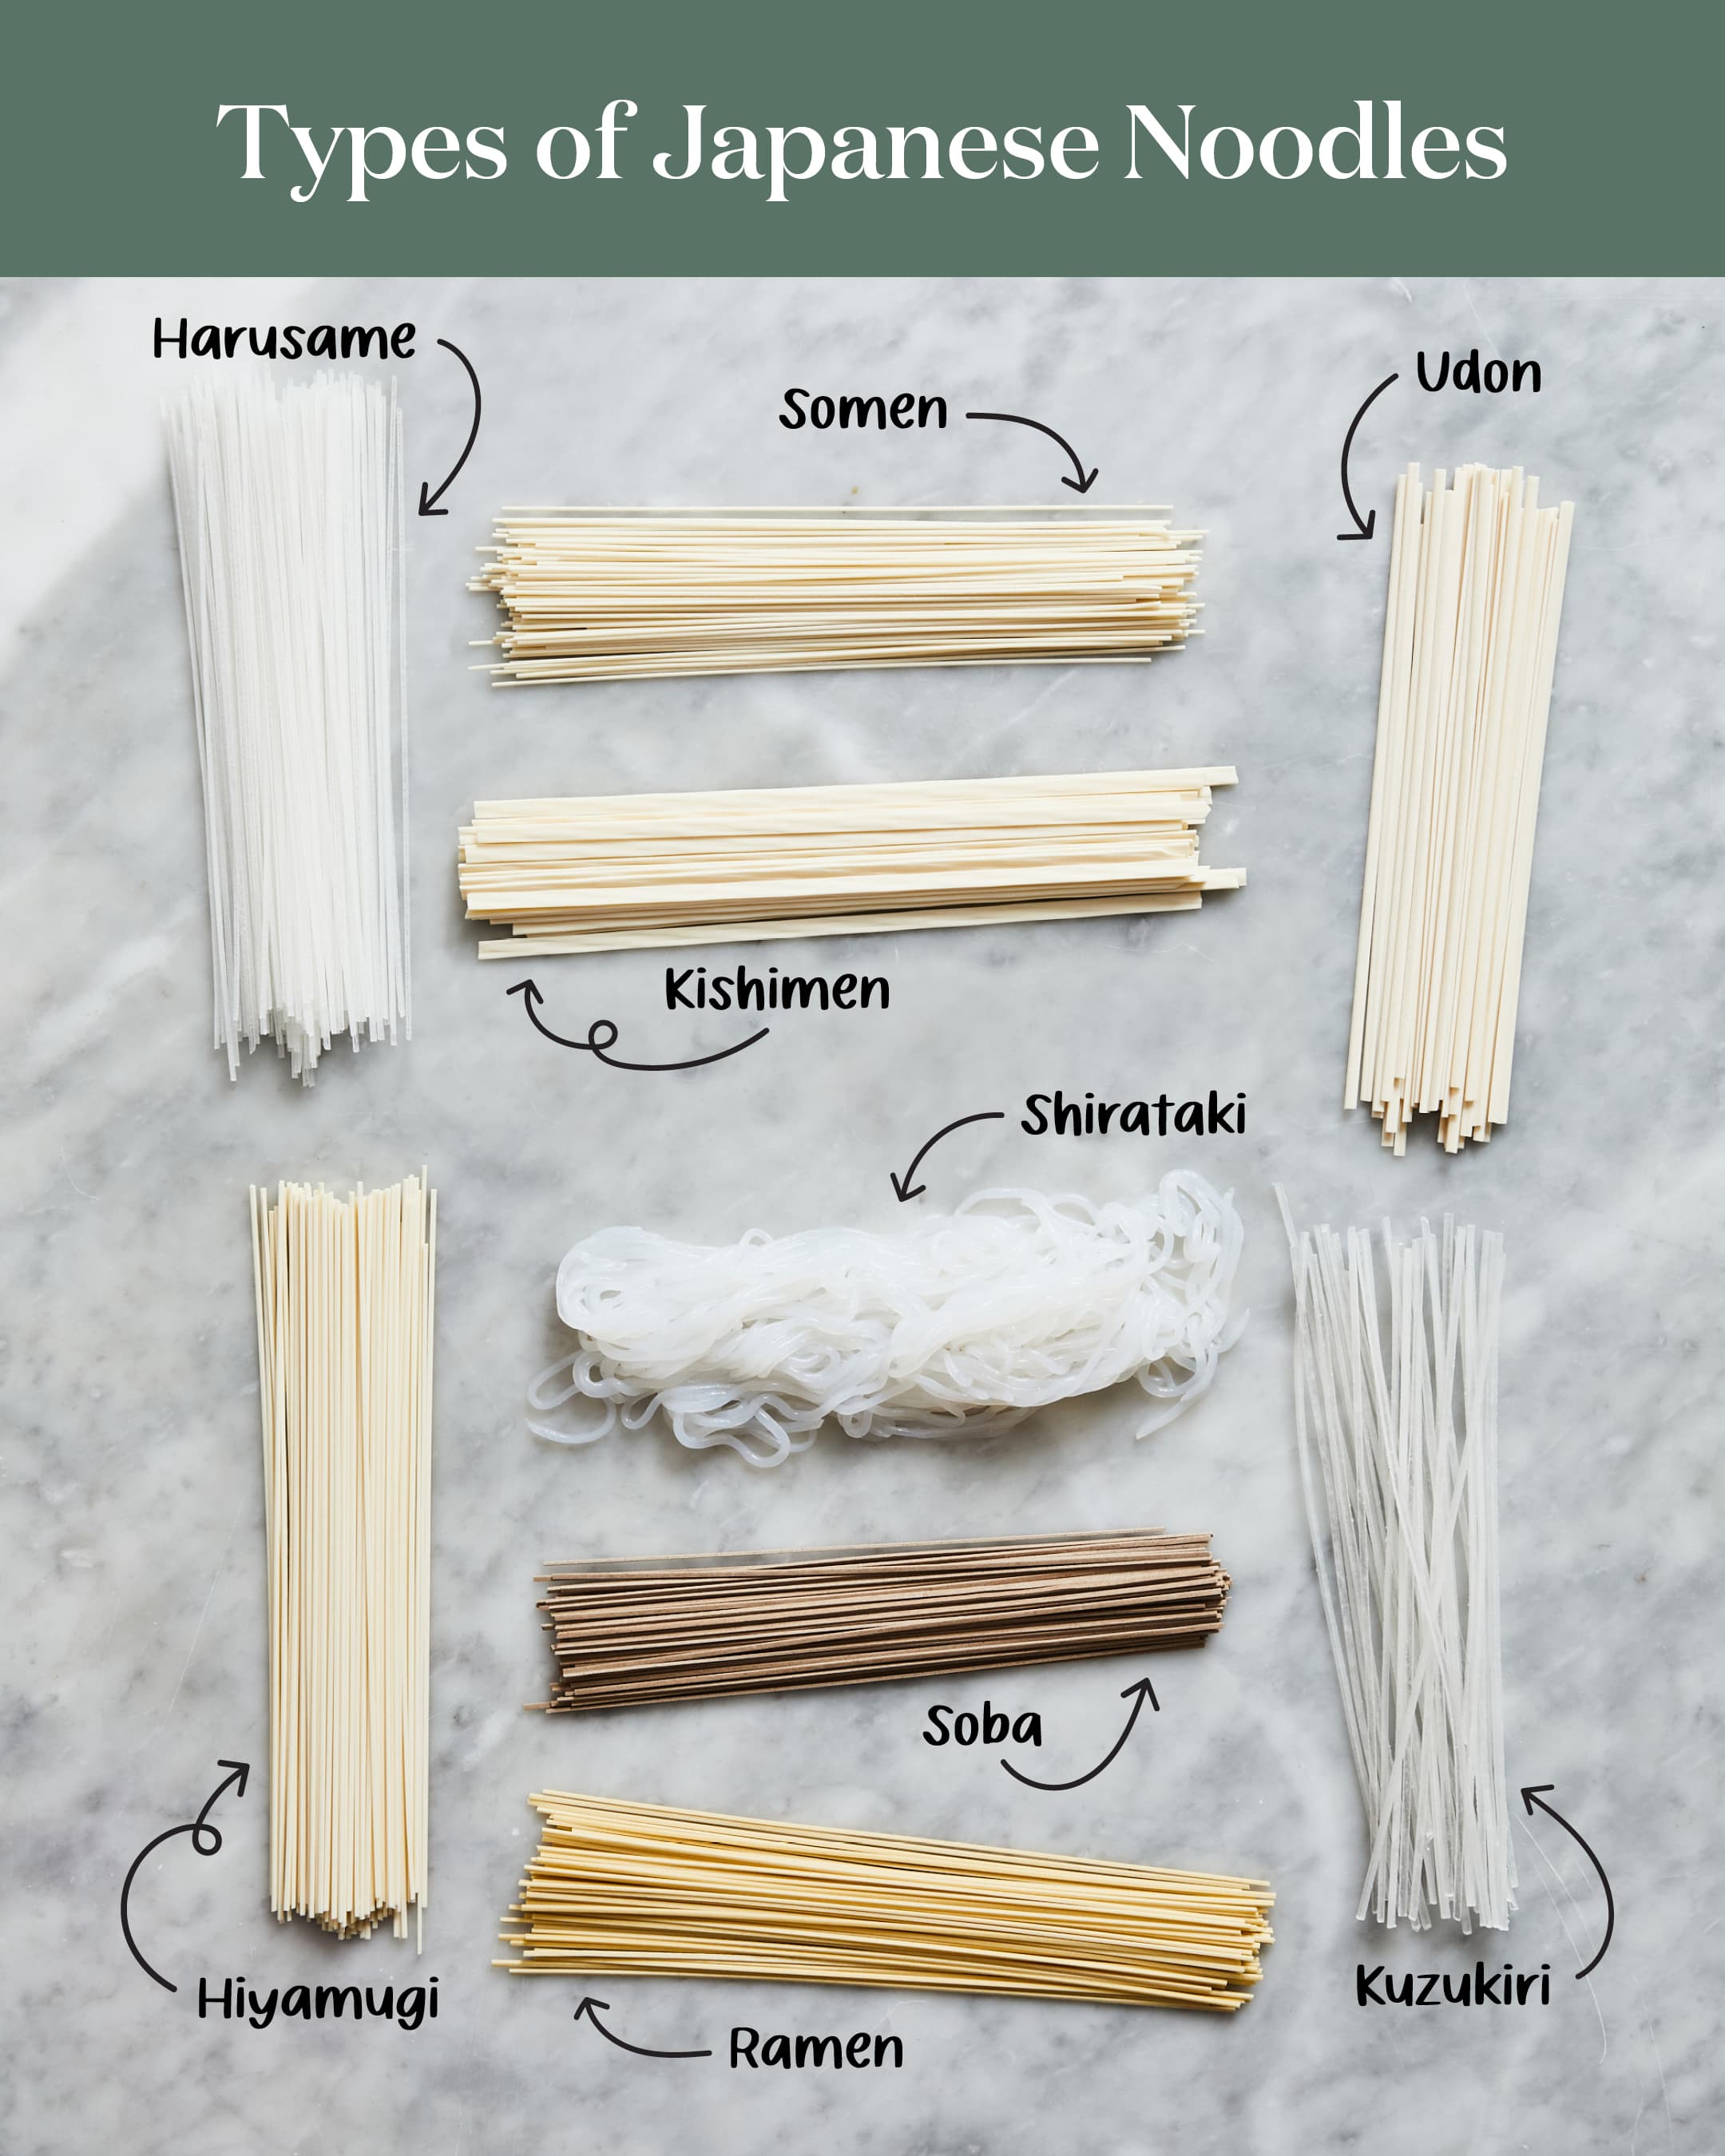 29 Types of Pasta and Their Uses